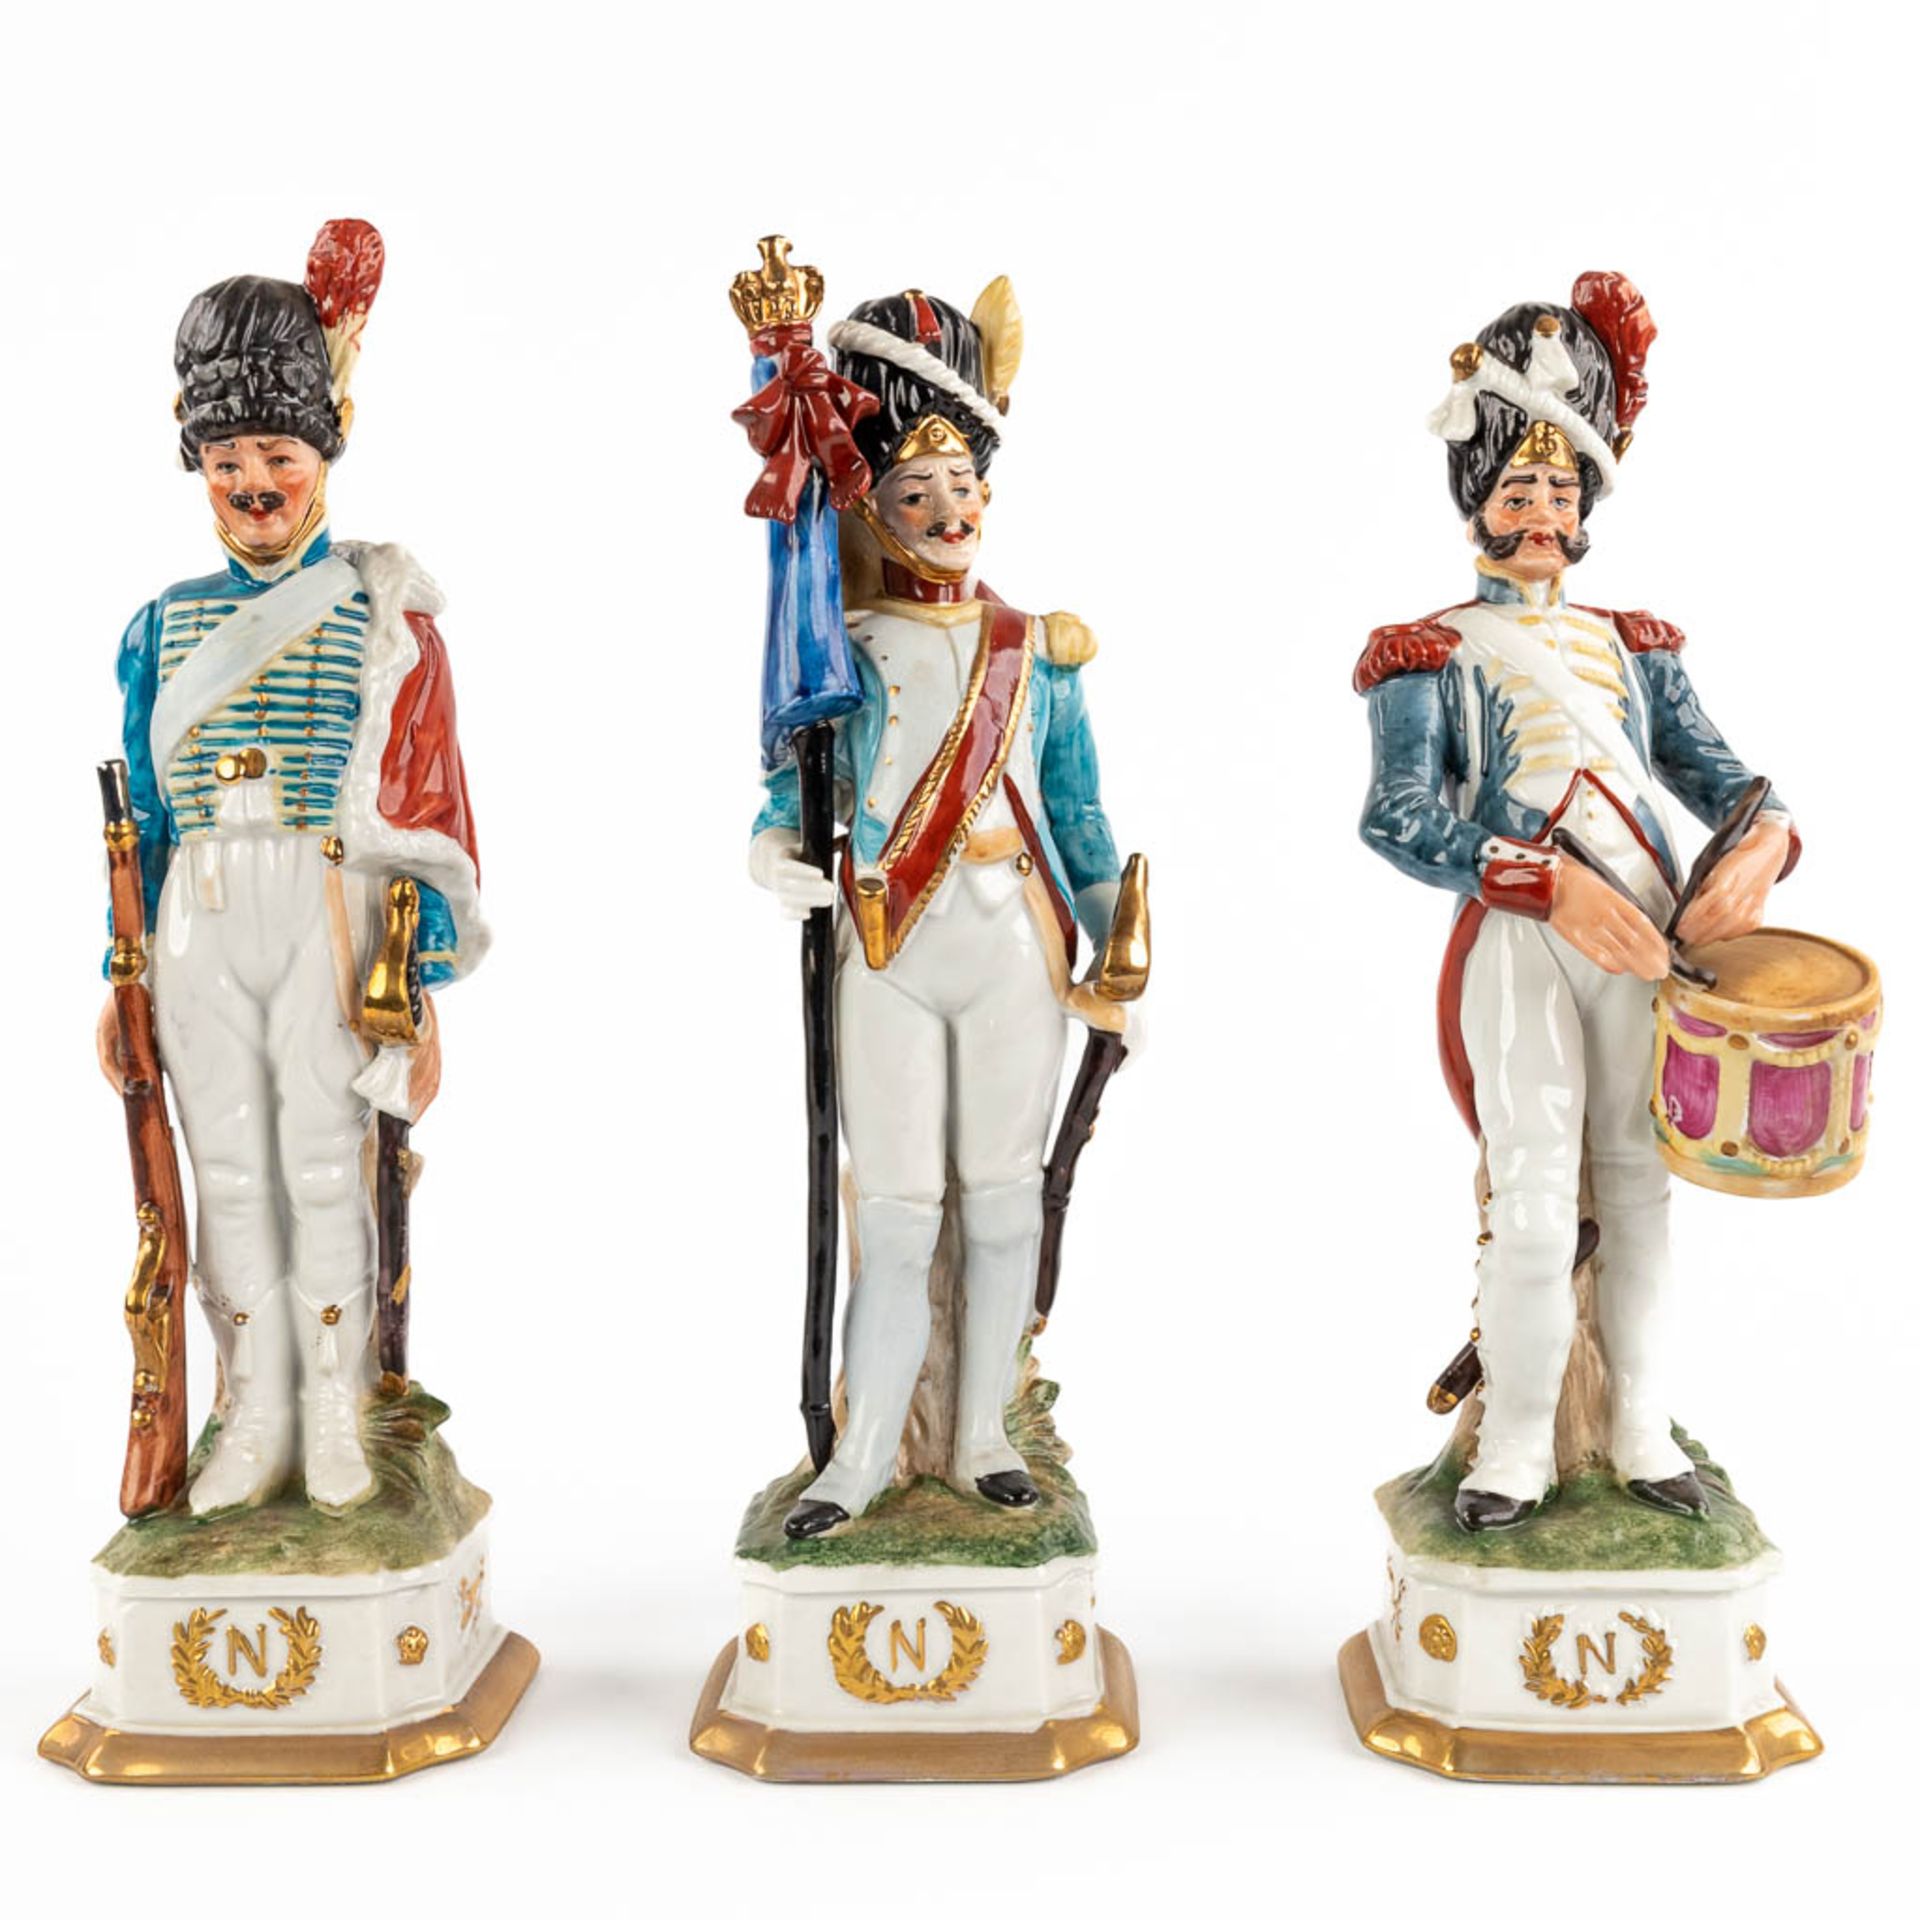 Napoleon and 9 generals, polychrome porcelain. 20th C. (H:32 cm) - Image 4 of 15